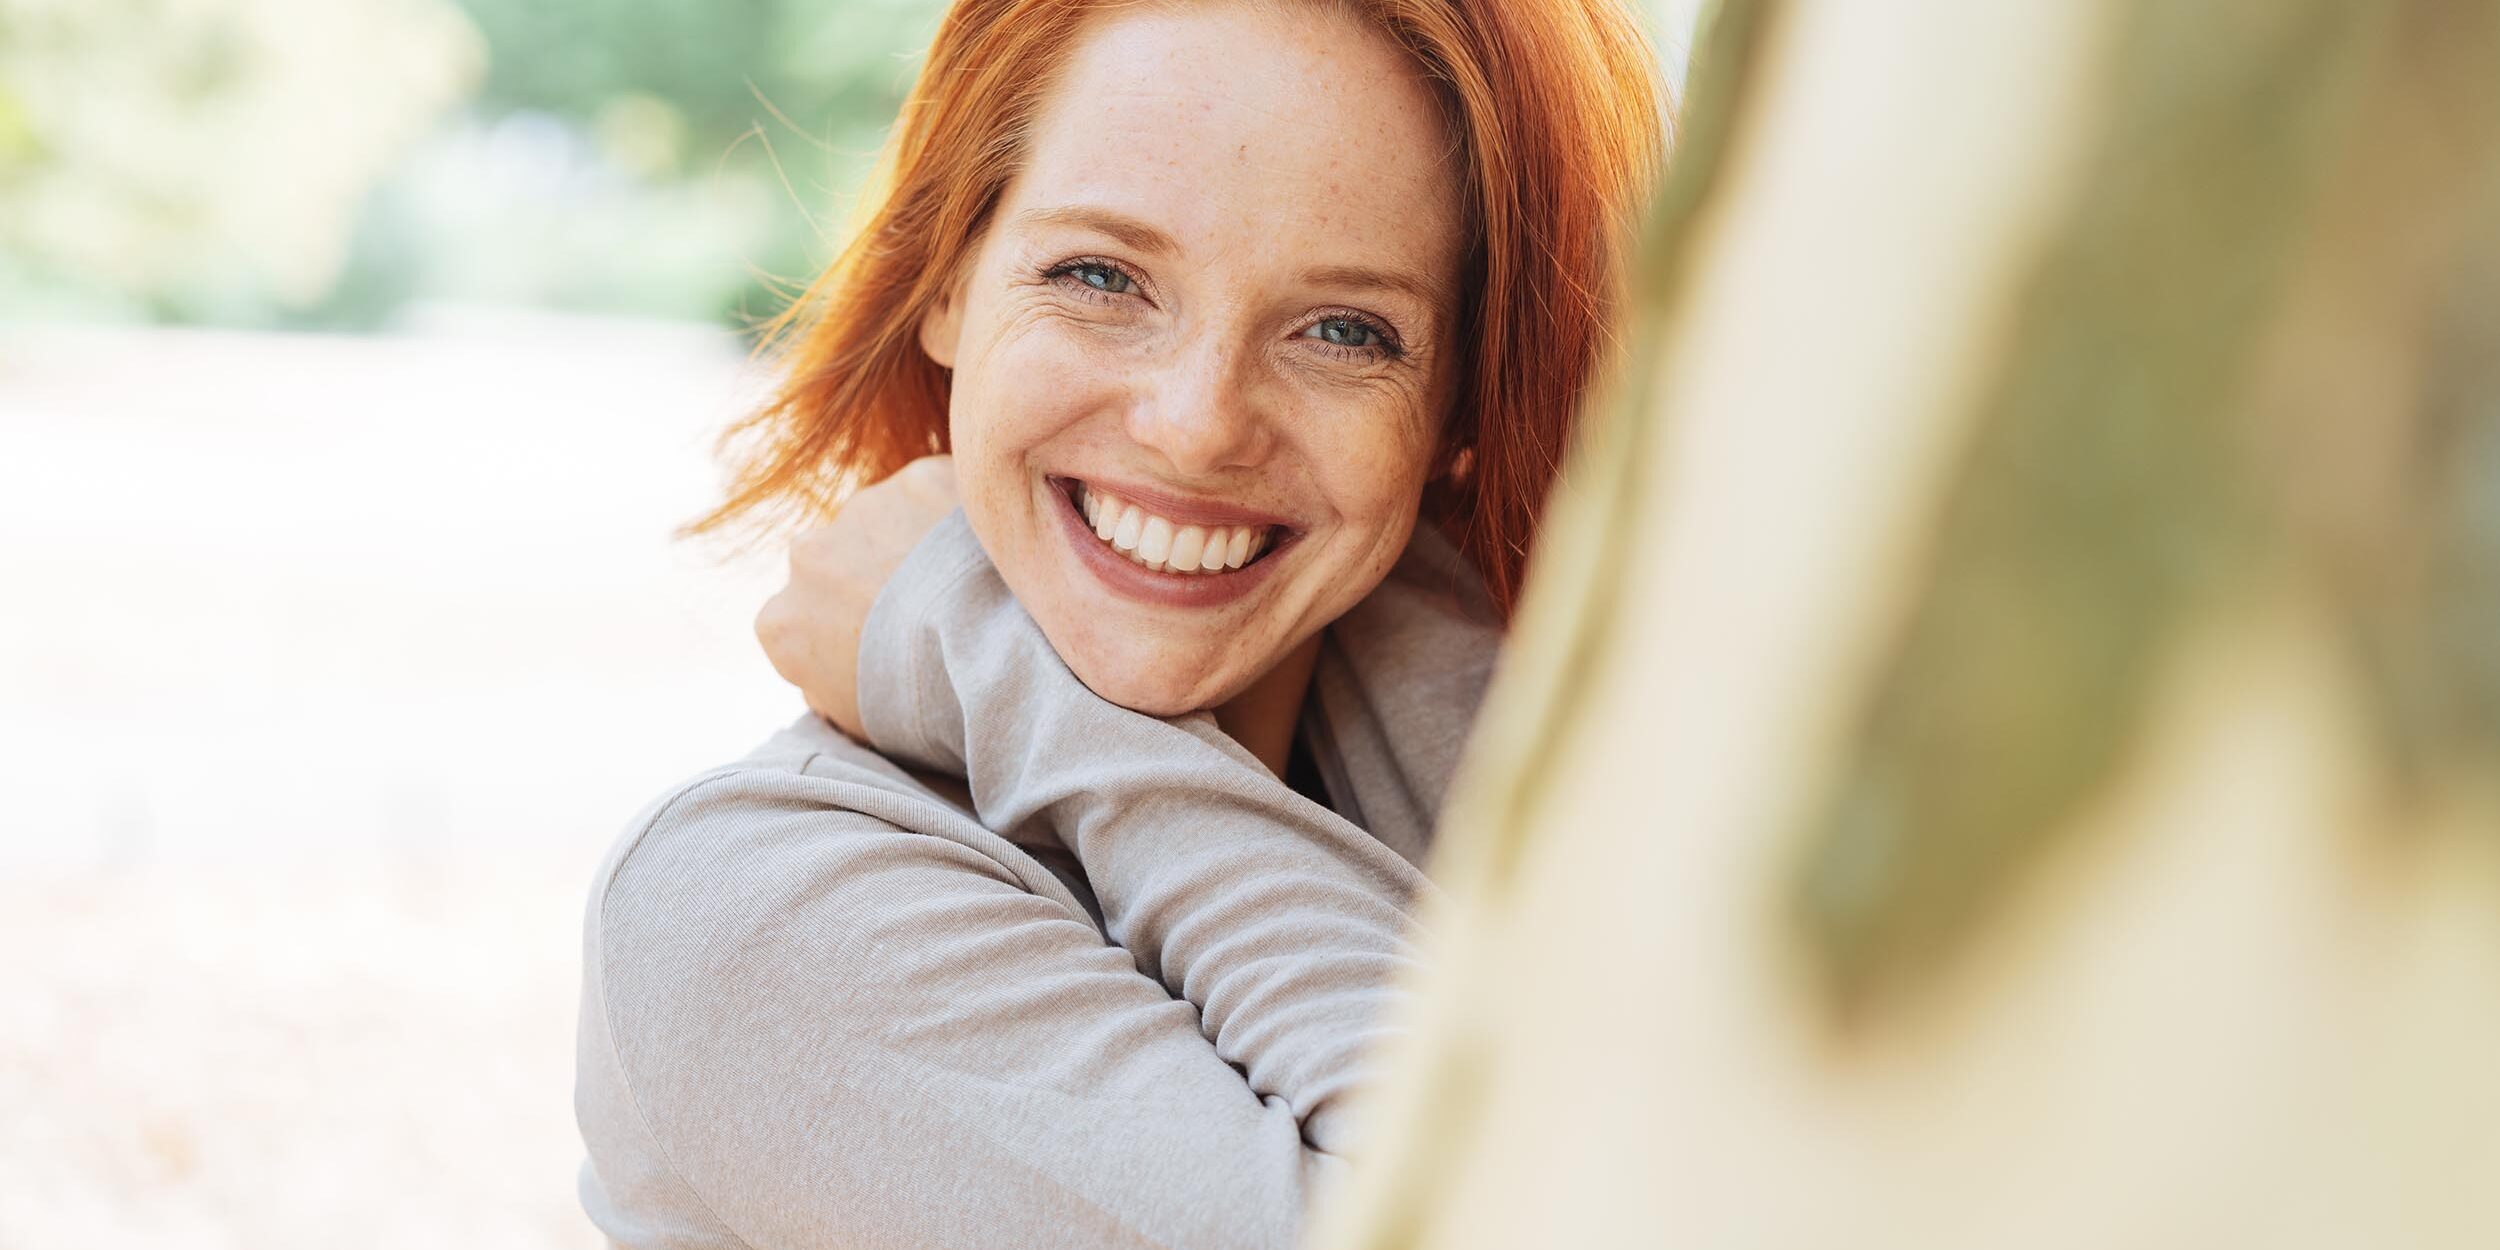 Cute vivacious redhead woman with beaming smile after dental veneers treatment